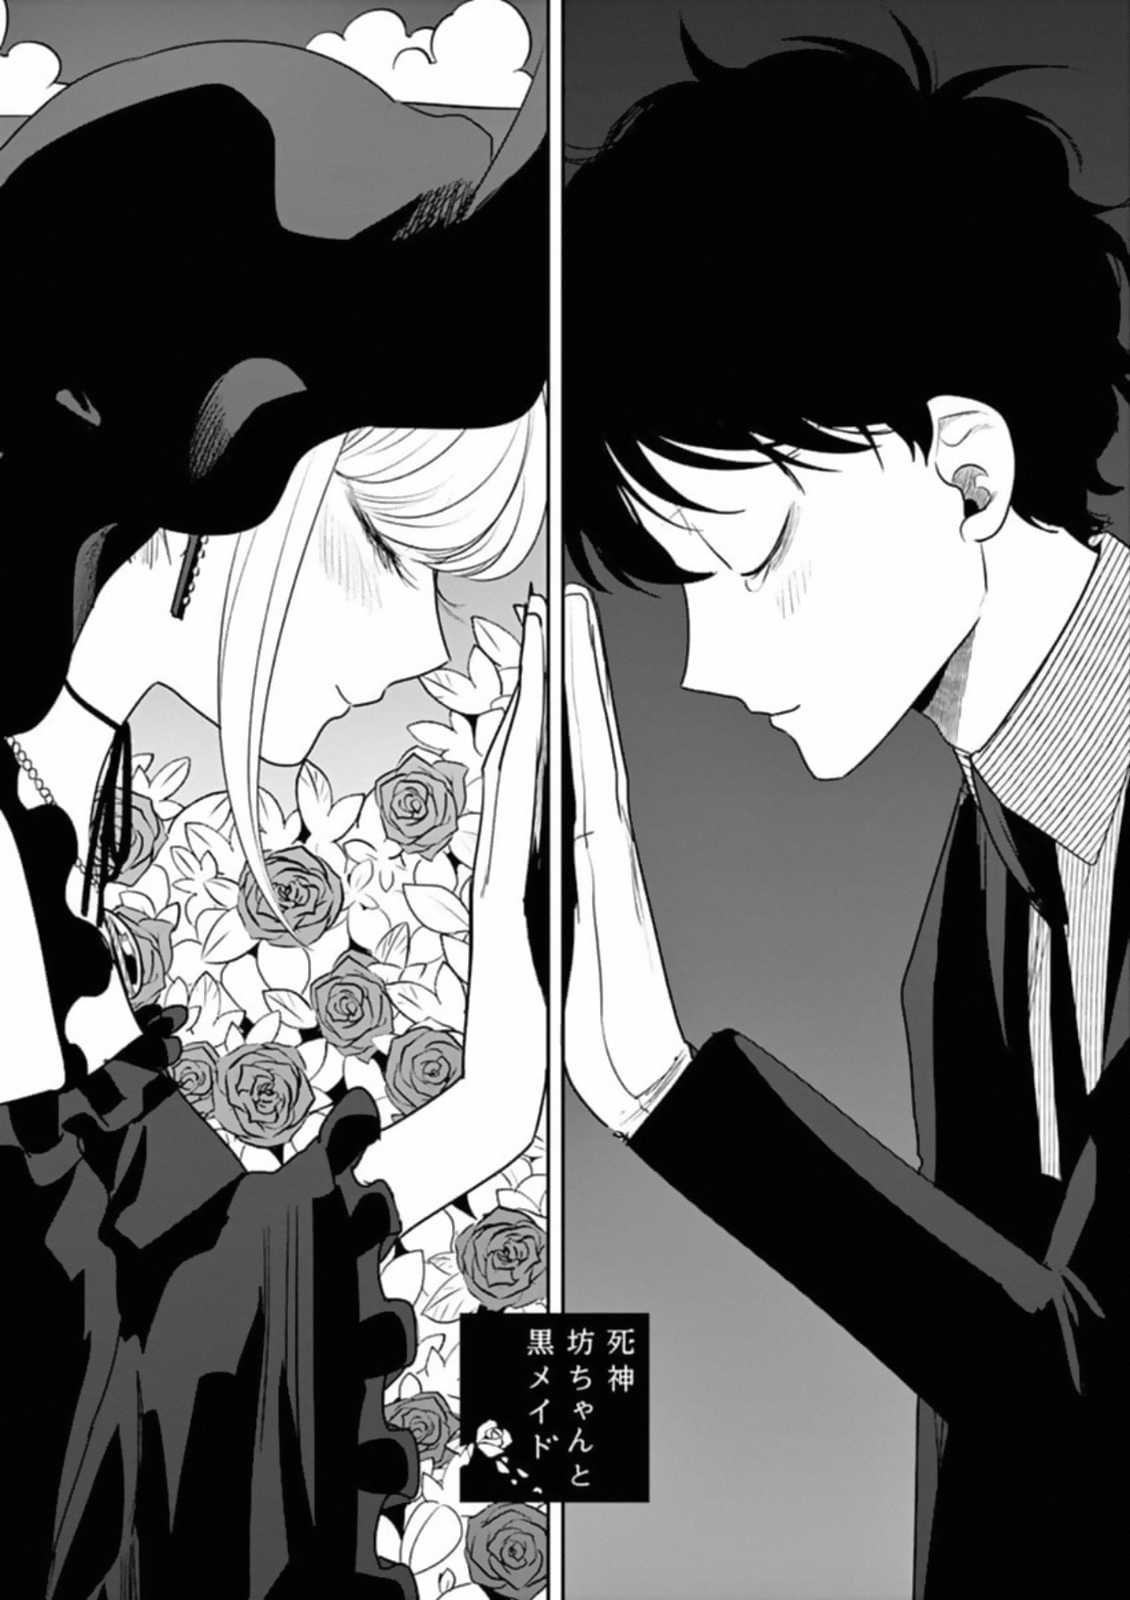 ART The Duke of Death and his Black Maid. Wallpaper material from the manga: manga